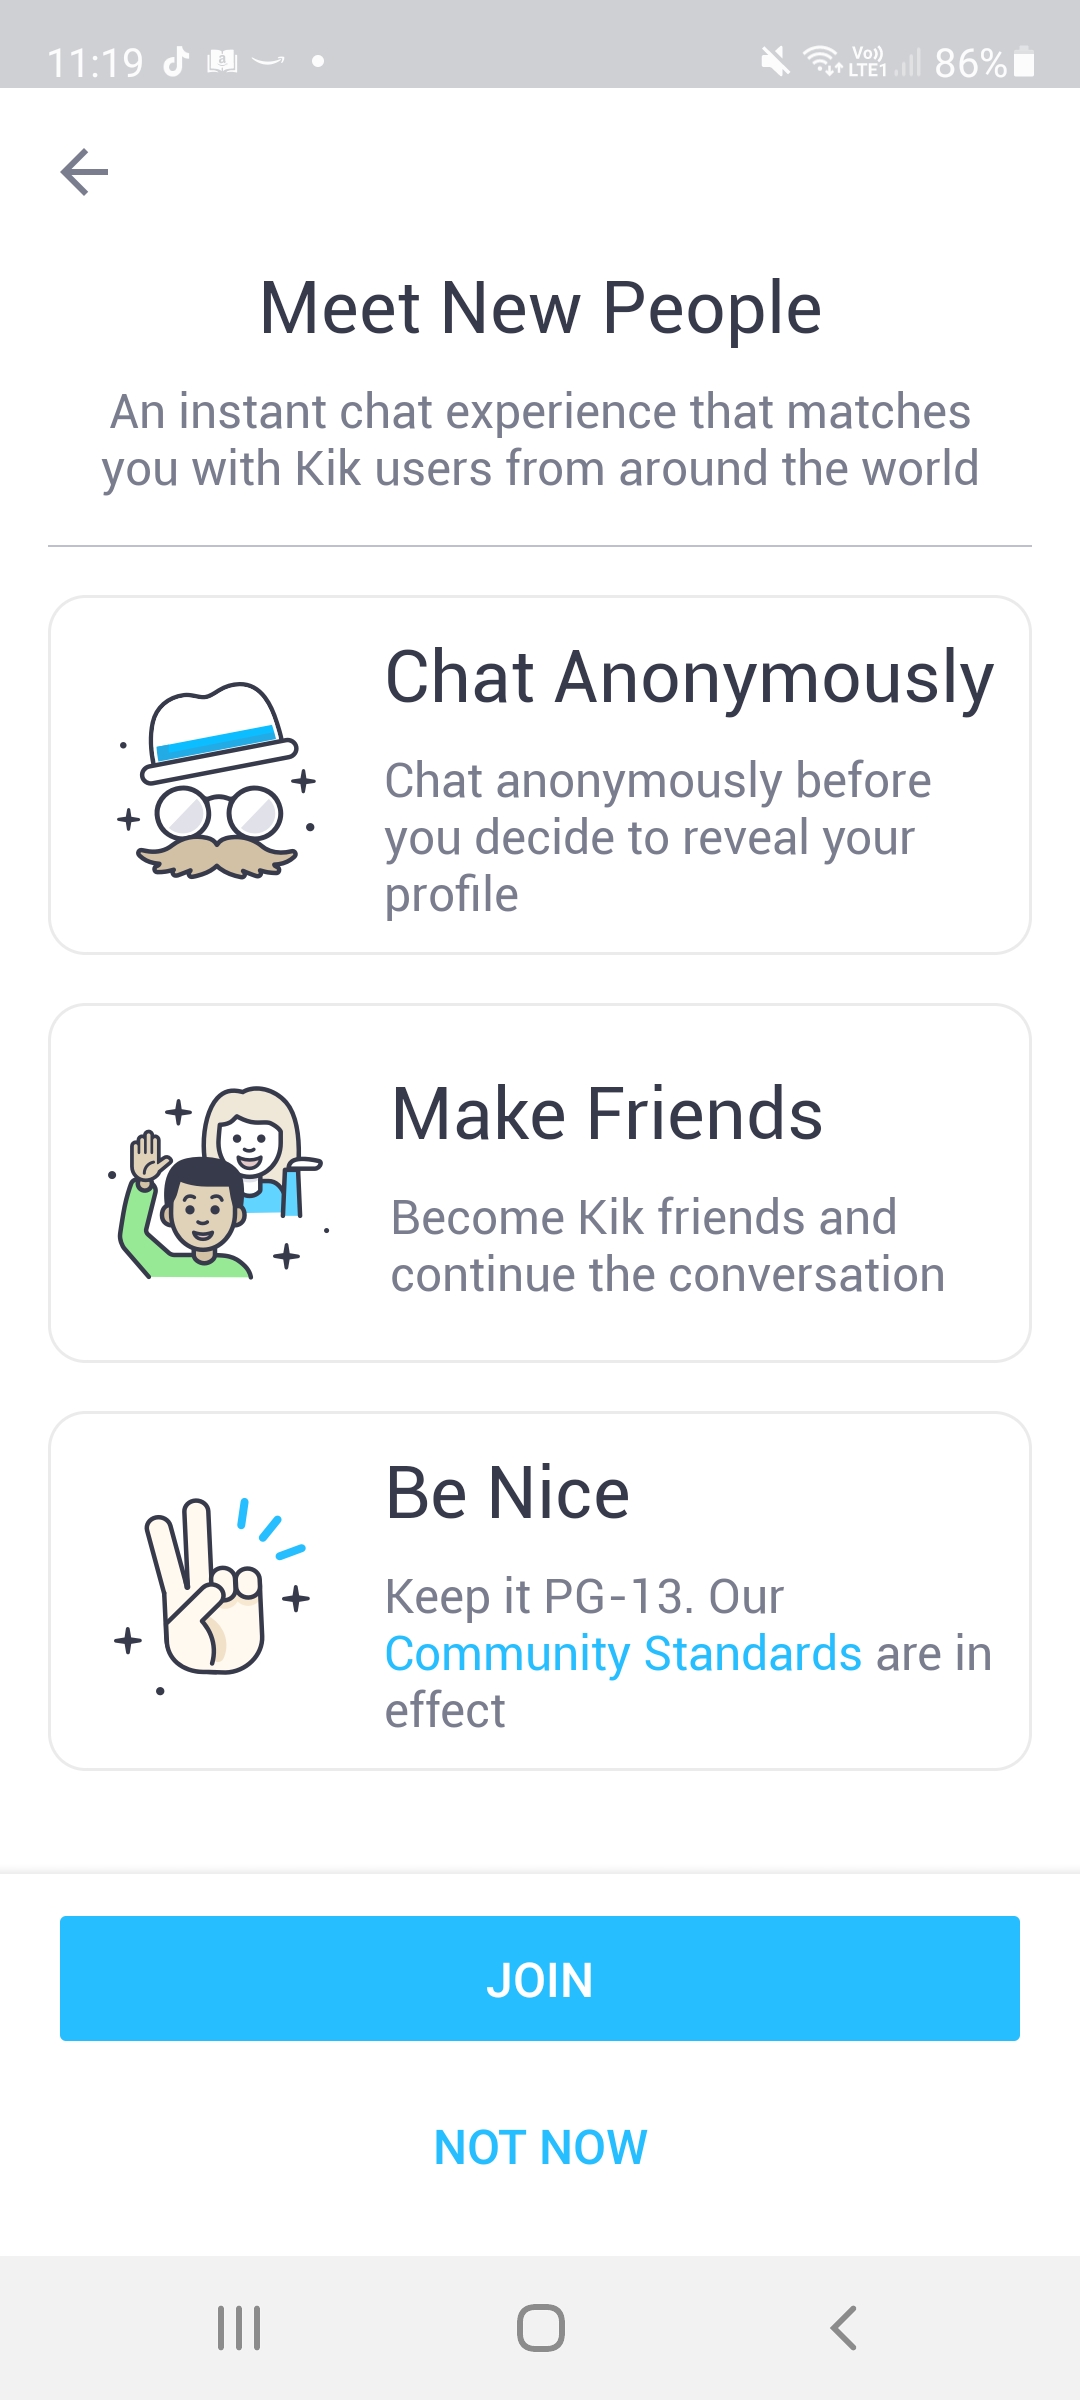 What Is Kik? Here's What You Need to Know the Messaging | Digital Trends